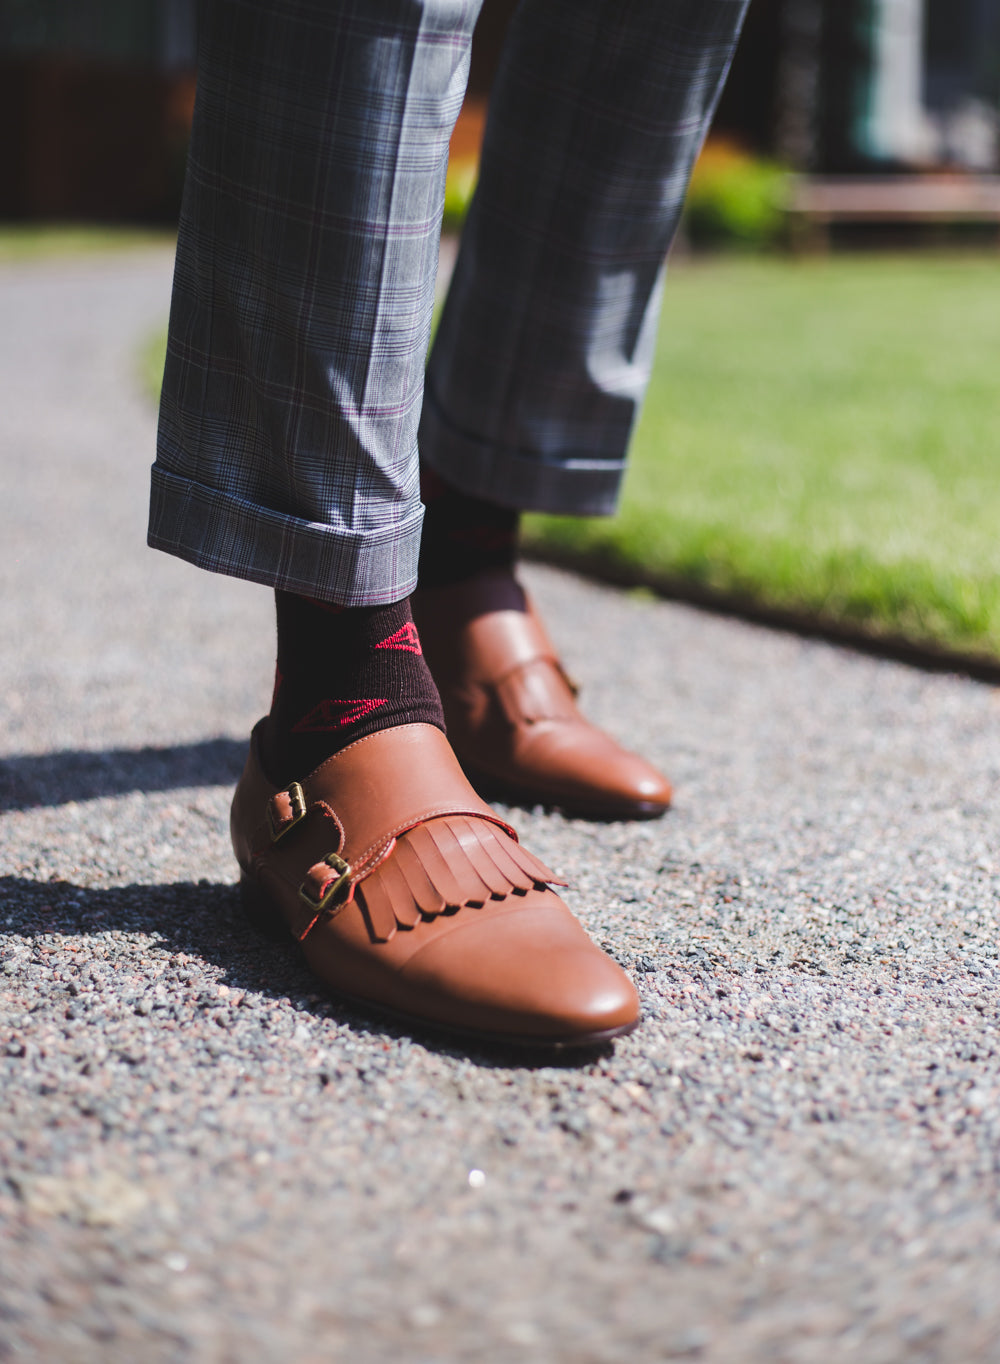 dark brown over the calf dress socks with a red envelope prints, brown dress shoes, plaid dress pants 